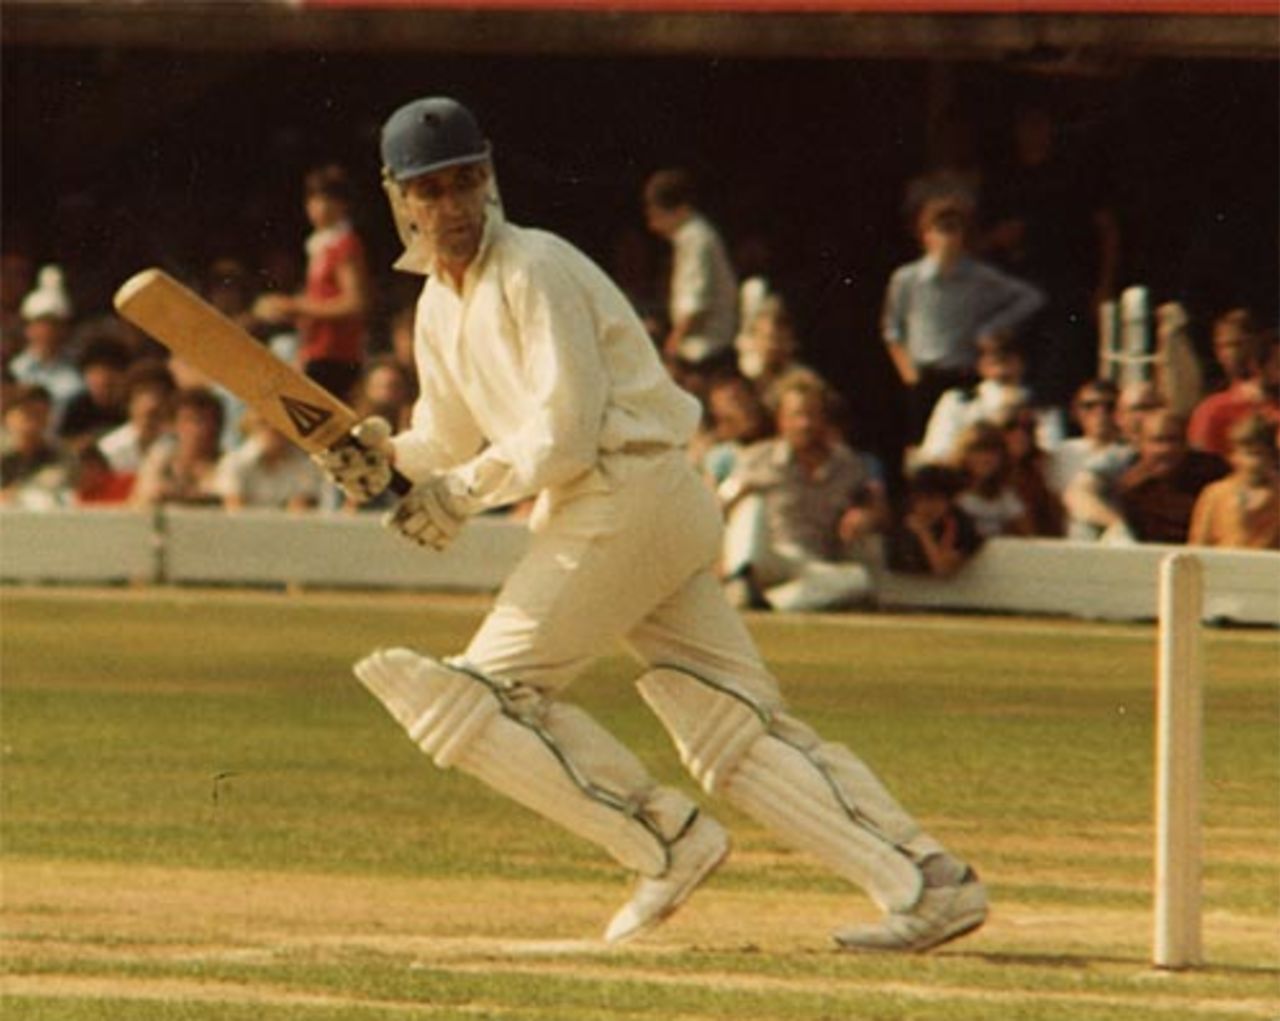 Mike Brearley on his way to 96 and the Man of the Match, Middlesex v Surrey, Gillette Cup final, Lord's, September 6, 1980